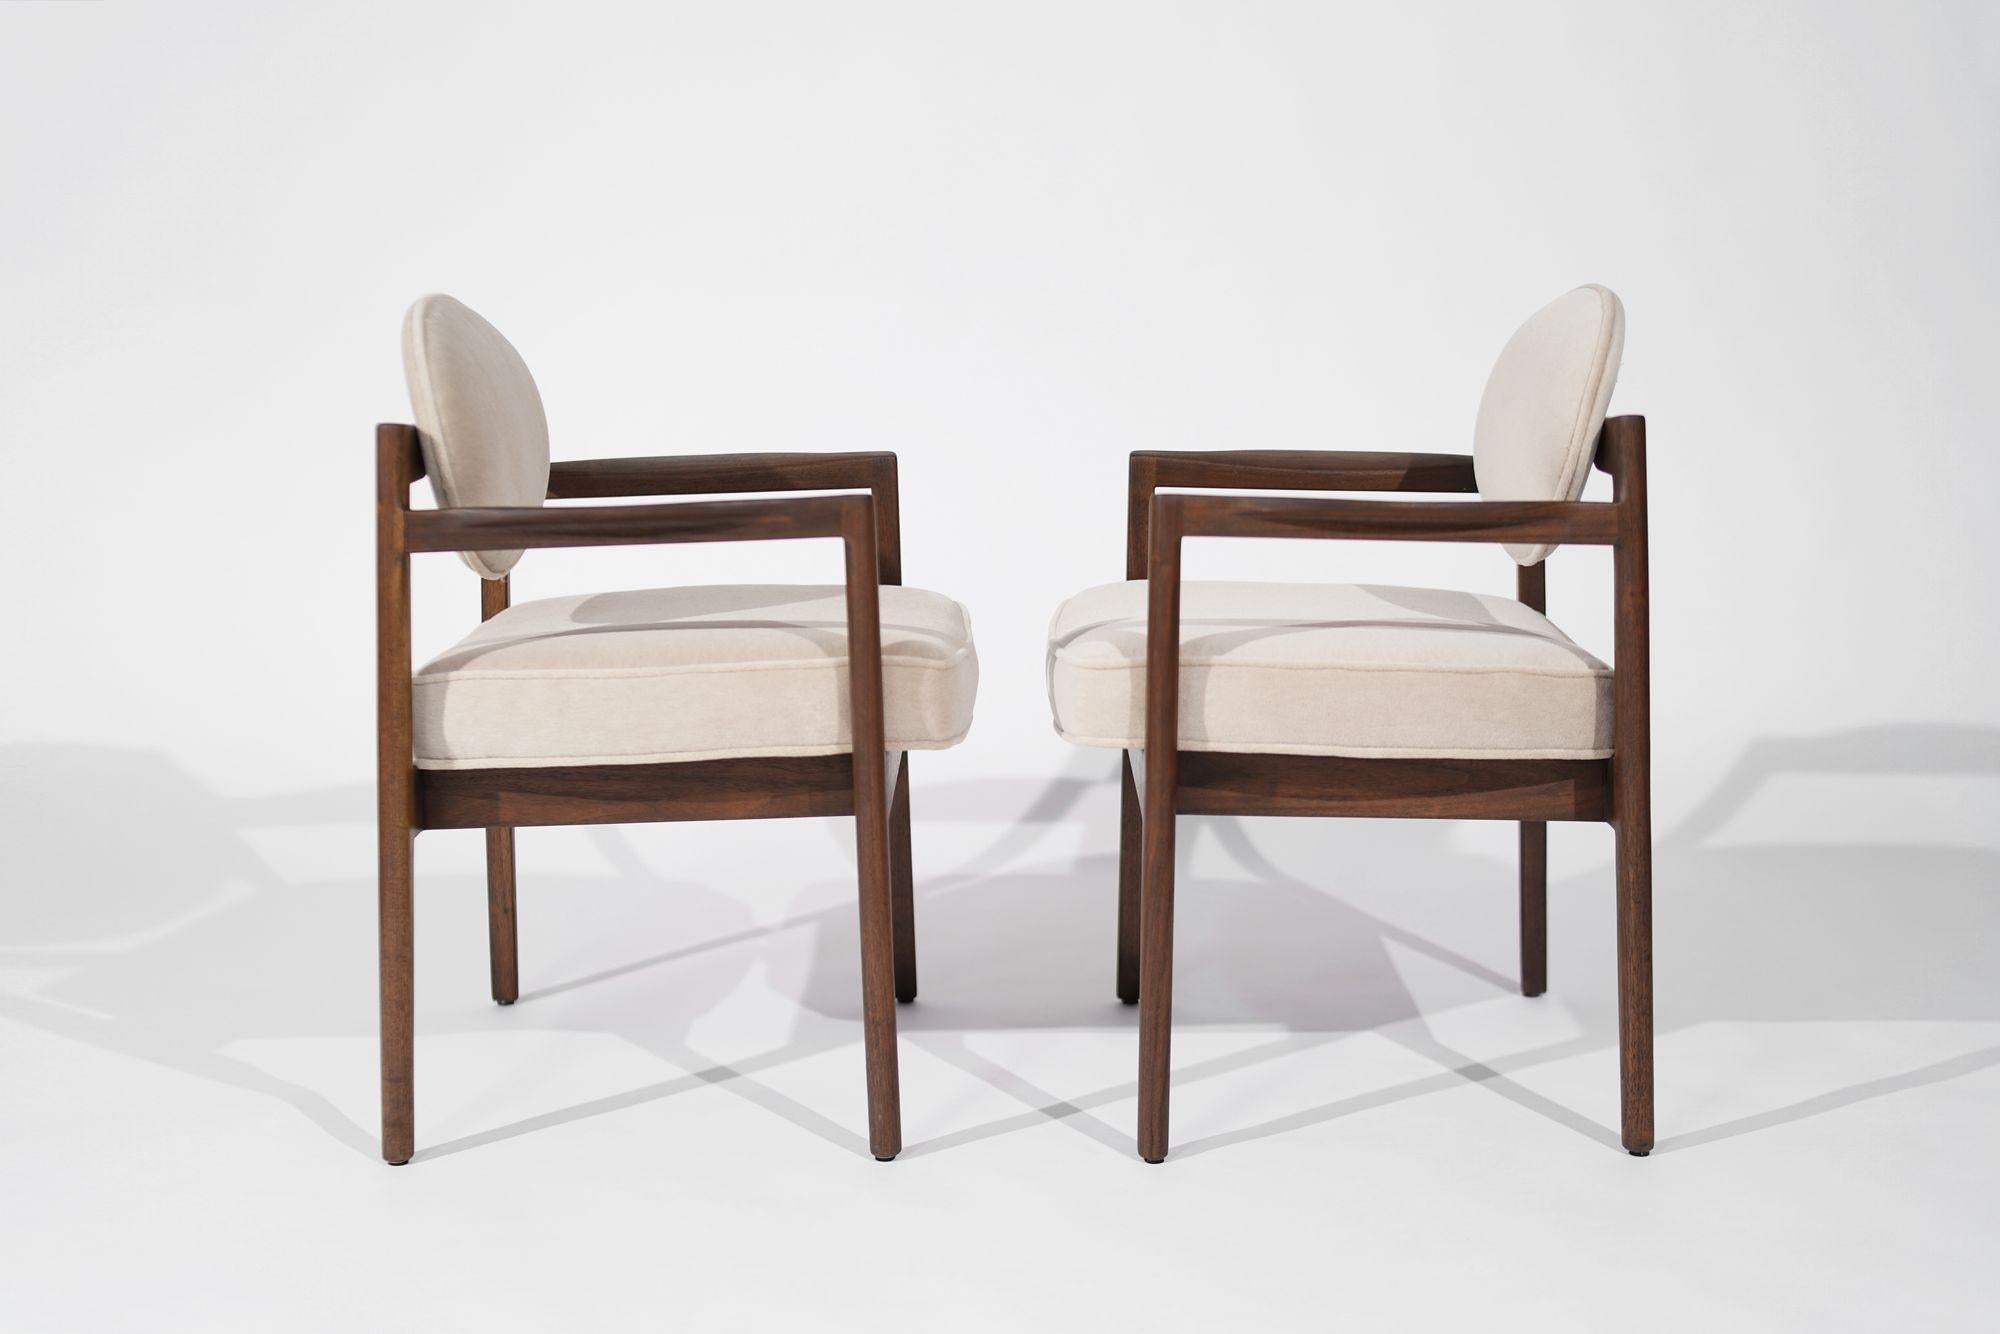 An exquisite pair of mid-century modern armchairs designed by Jens Risom, crafted circa 1960-1969. Meticulously restored, the walnut framework shines with renewed beauty, complemented by a luxurious reupholstery in natural mohair. A perfect blend of